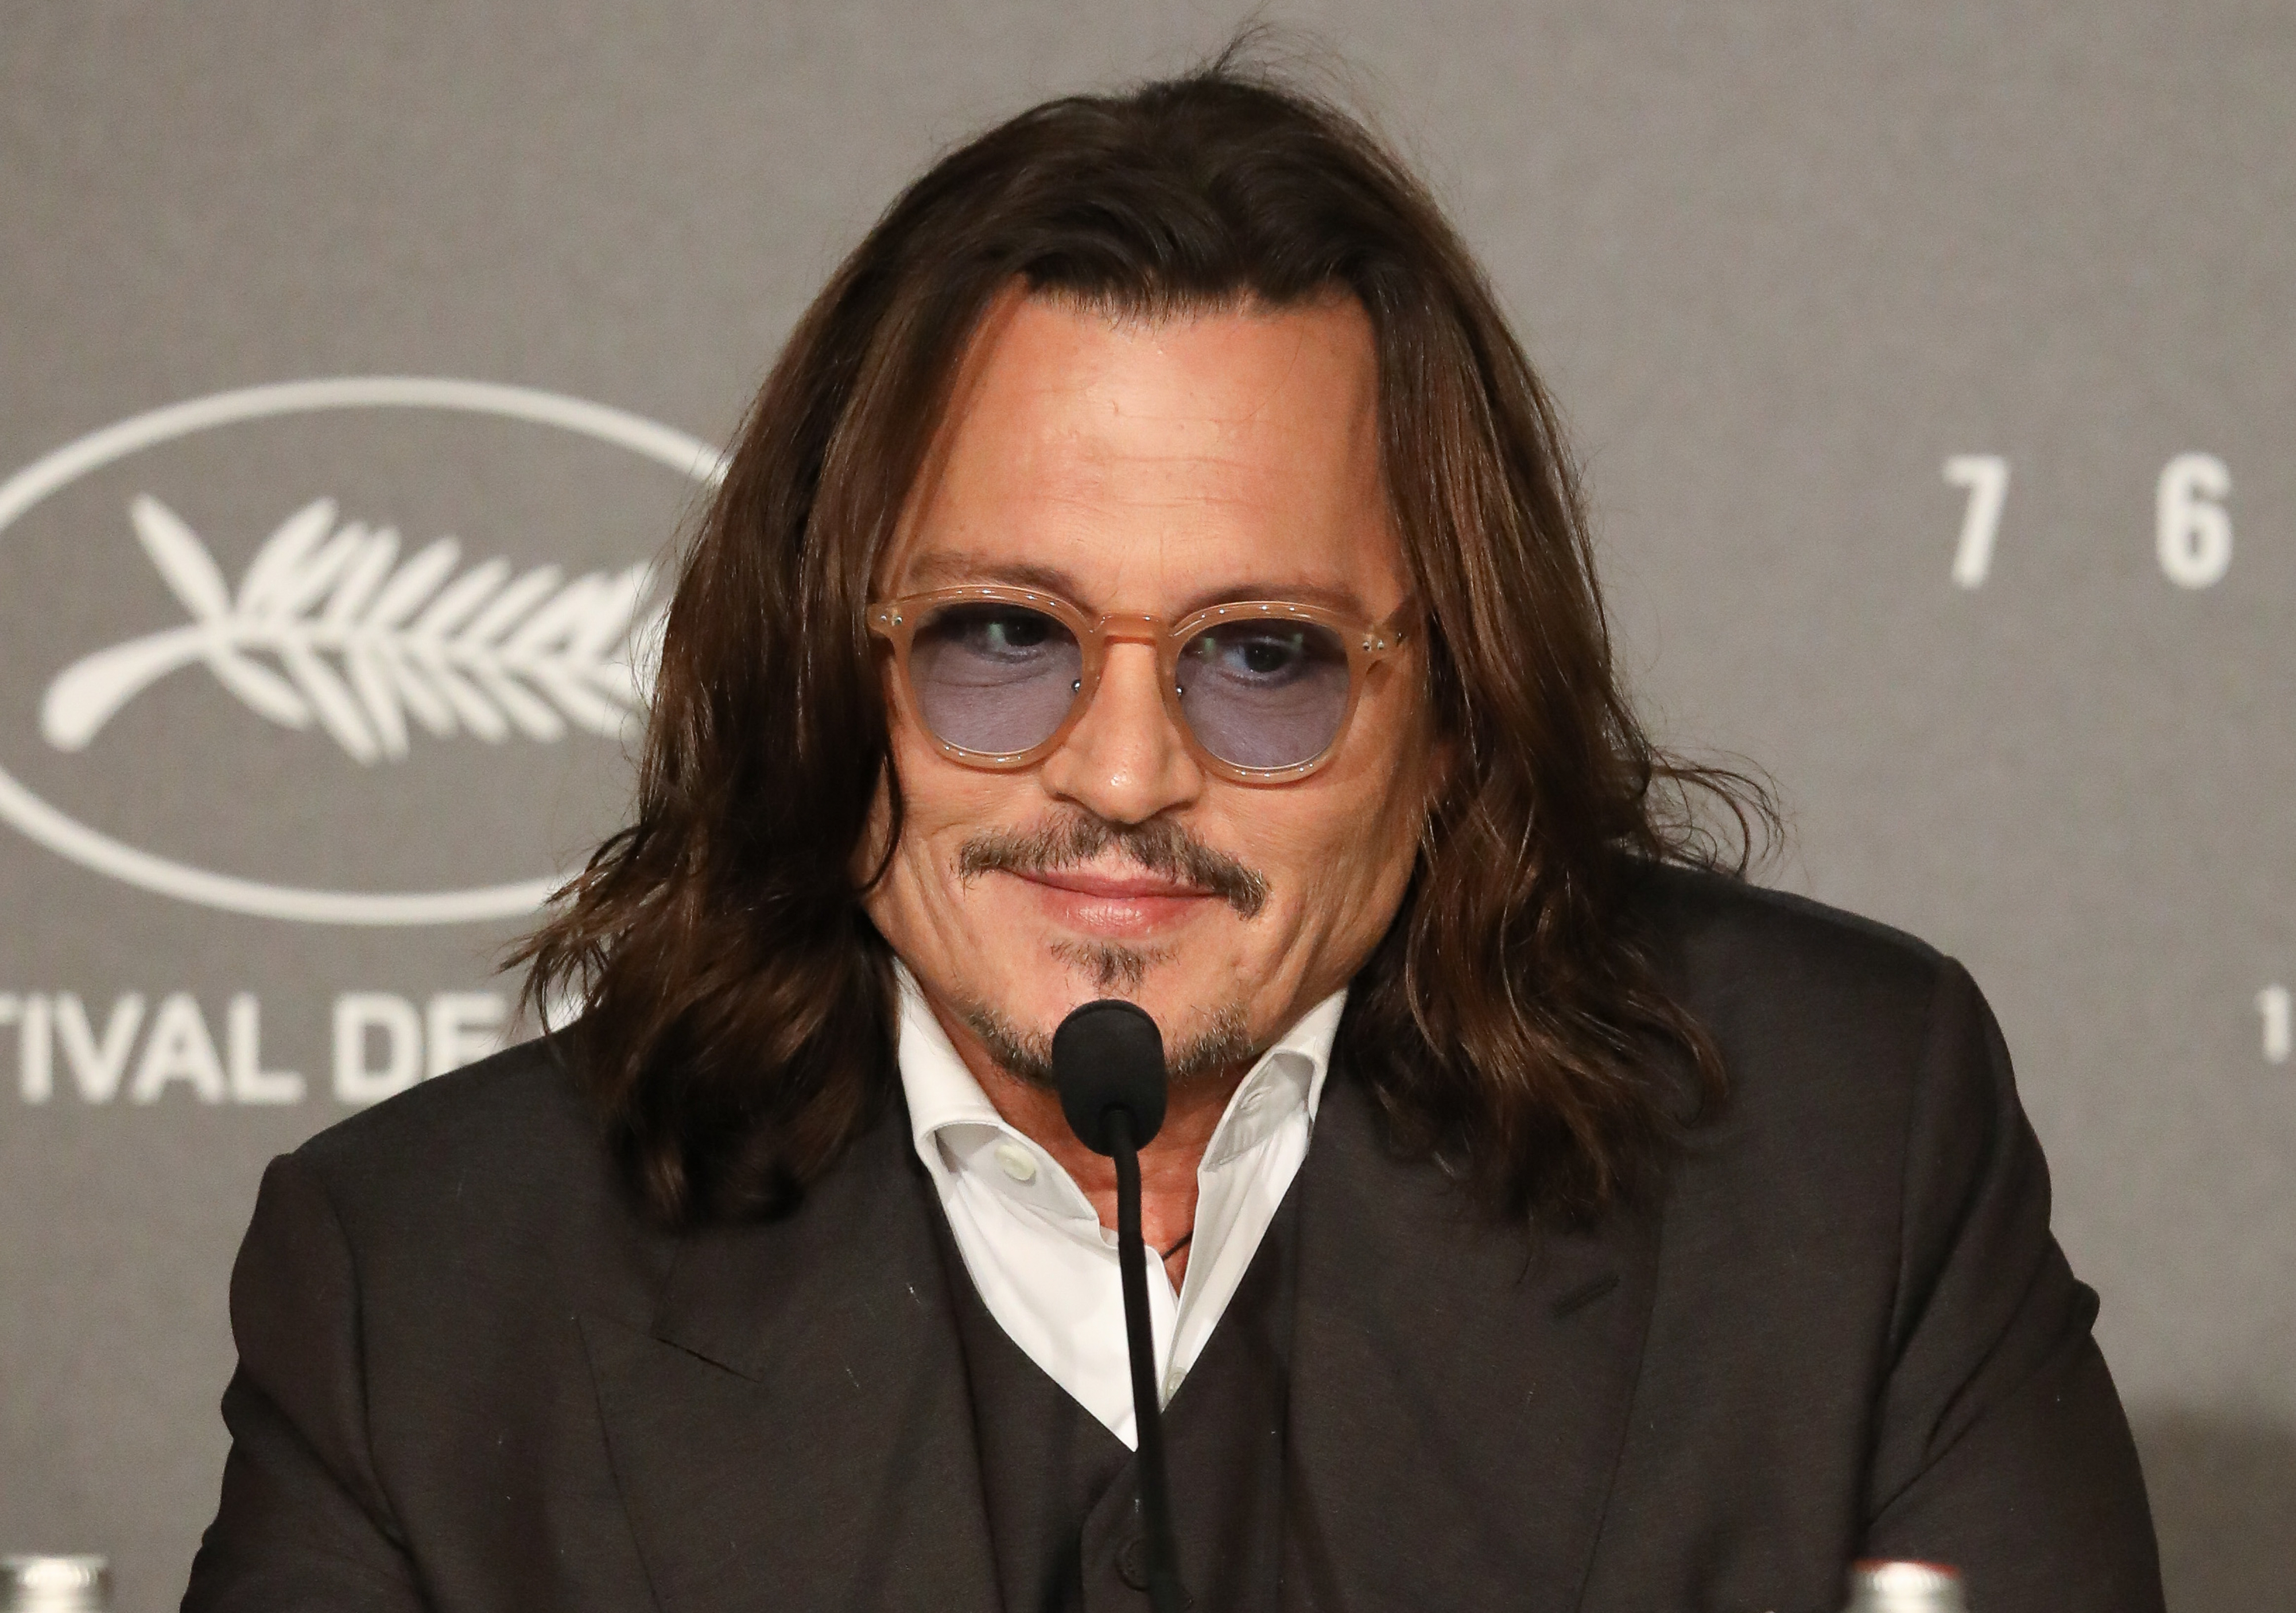 Johnny Depp wearing glasses and a suit, speaking into a microphone at an event